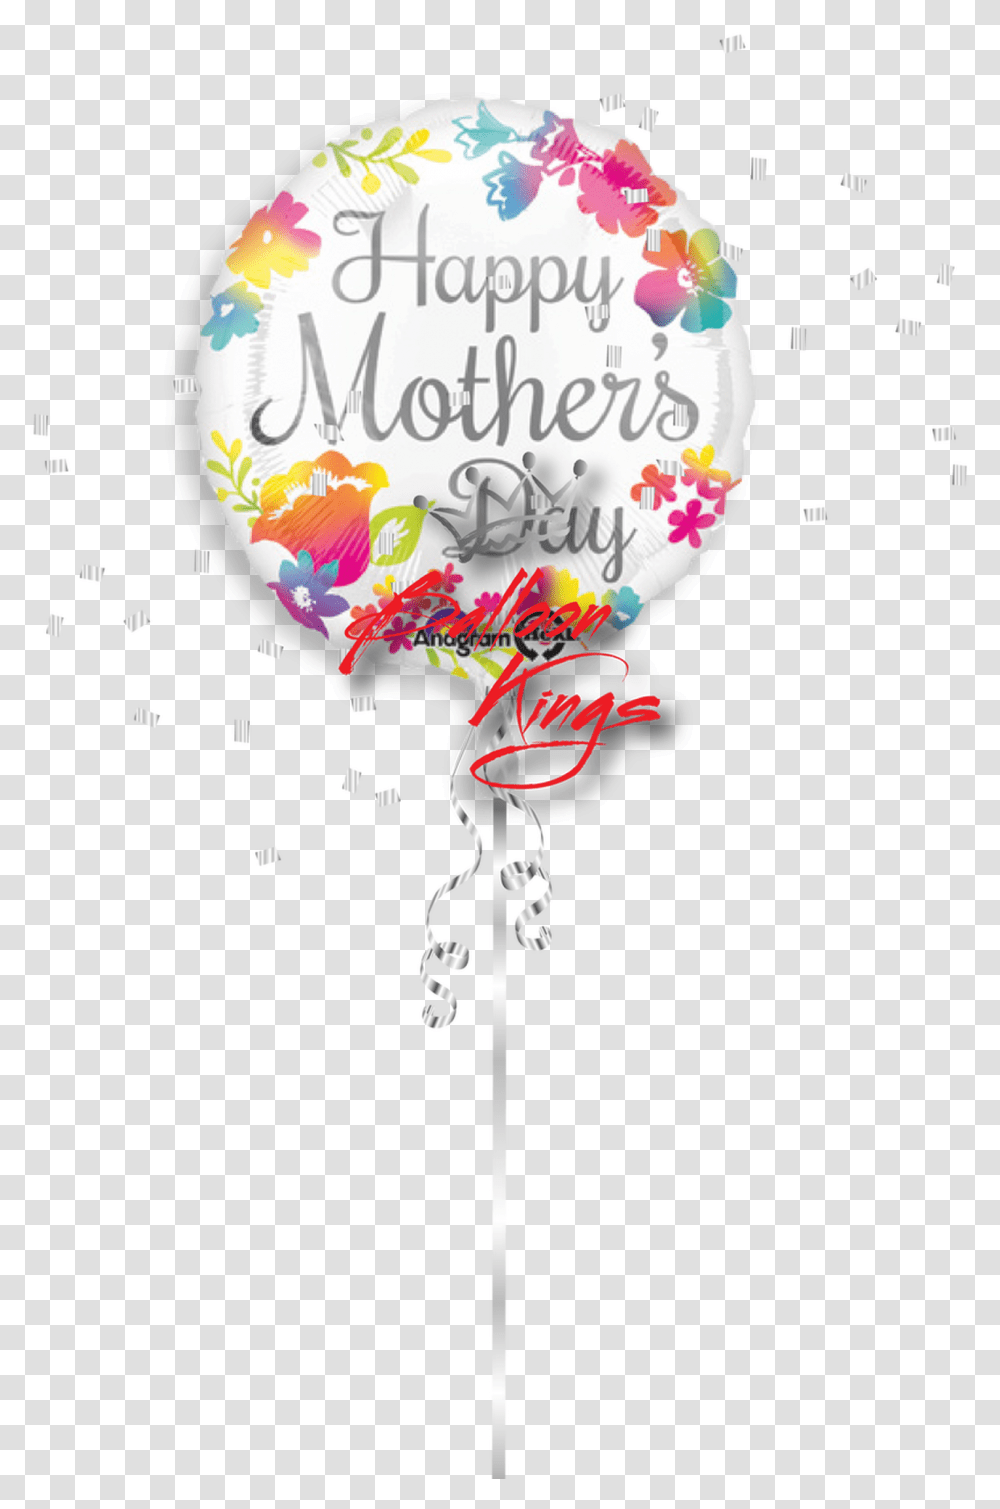 Happy Mothers Day Watercolor Calligraphy Watercolor Happy Mothers Day, Balloon, Paper, Birthday Cake, Dessert Transparent Png